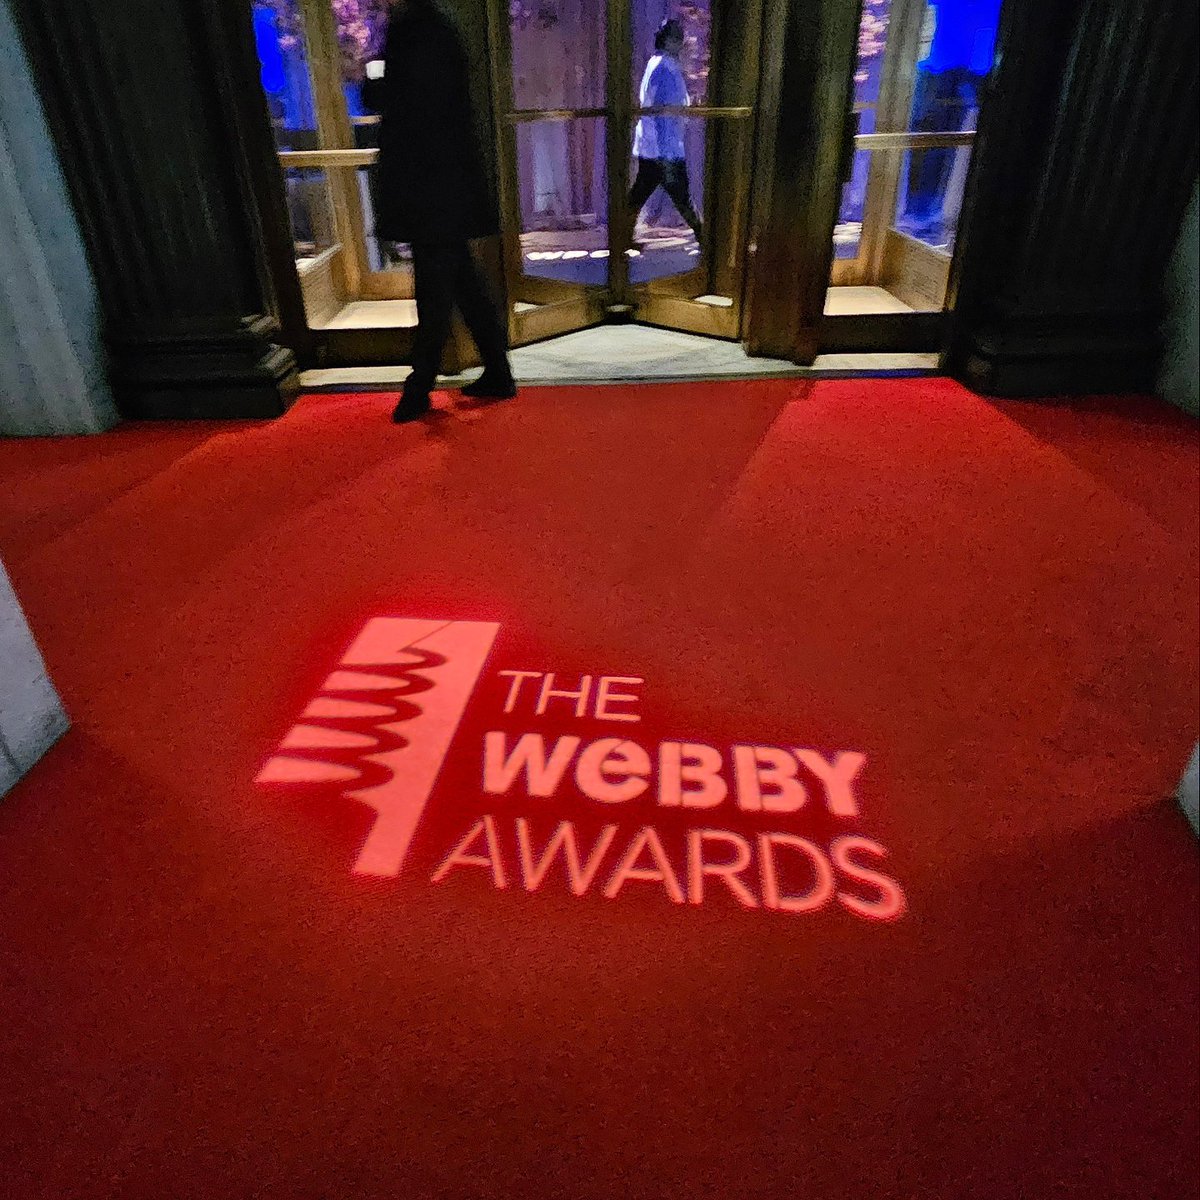 Was honoured to accept the Webby for Best Businees Newsletter alongside my TLDR editors at @TheWebbyAwards in NYC last night! #webbys